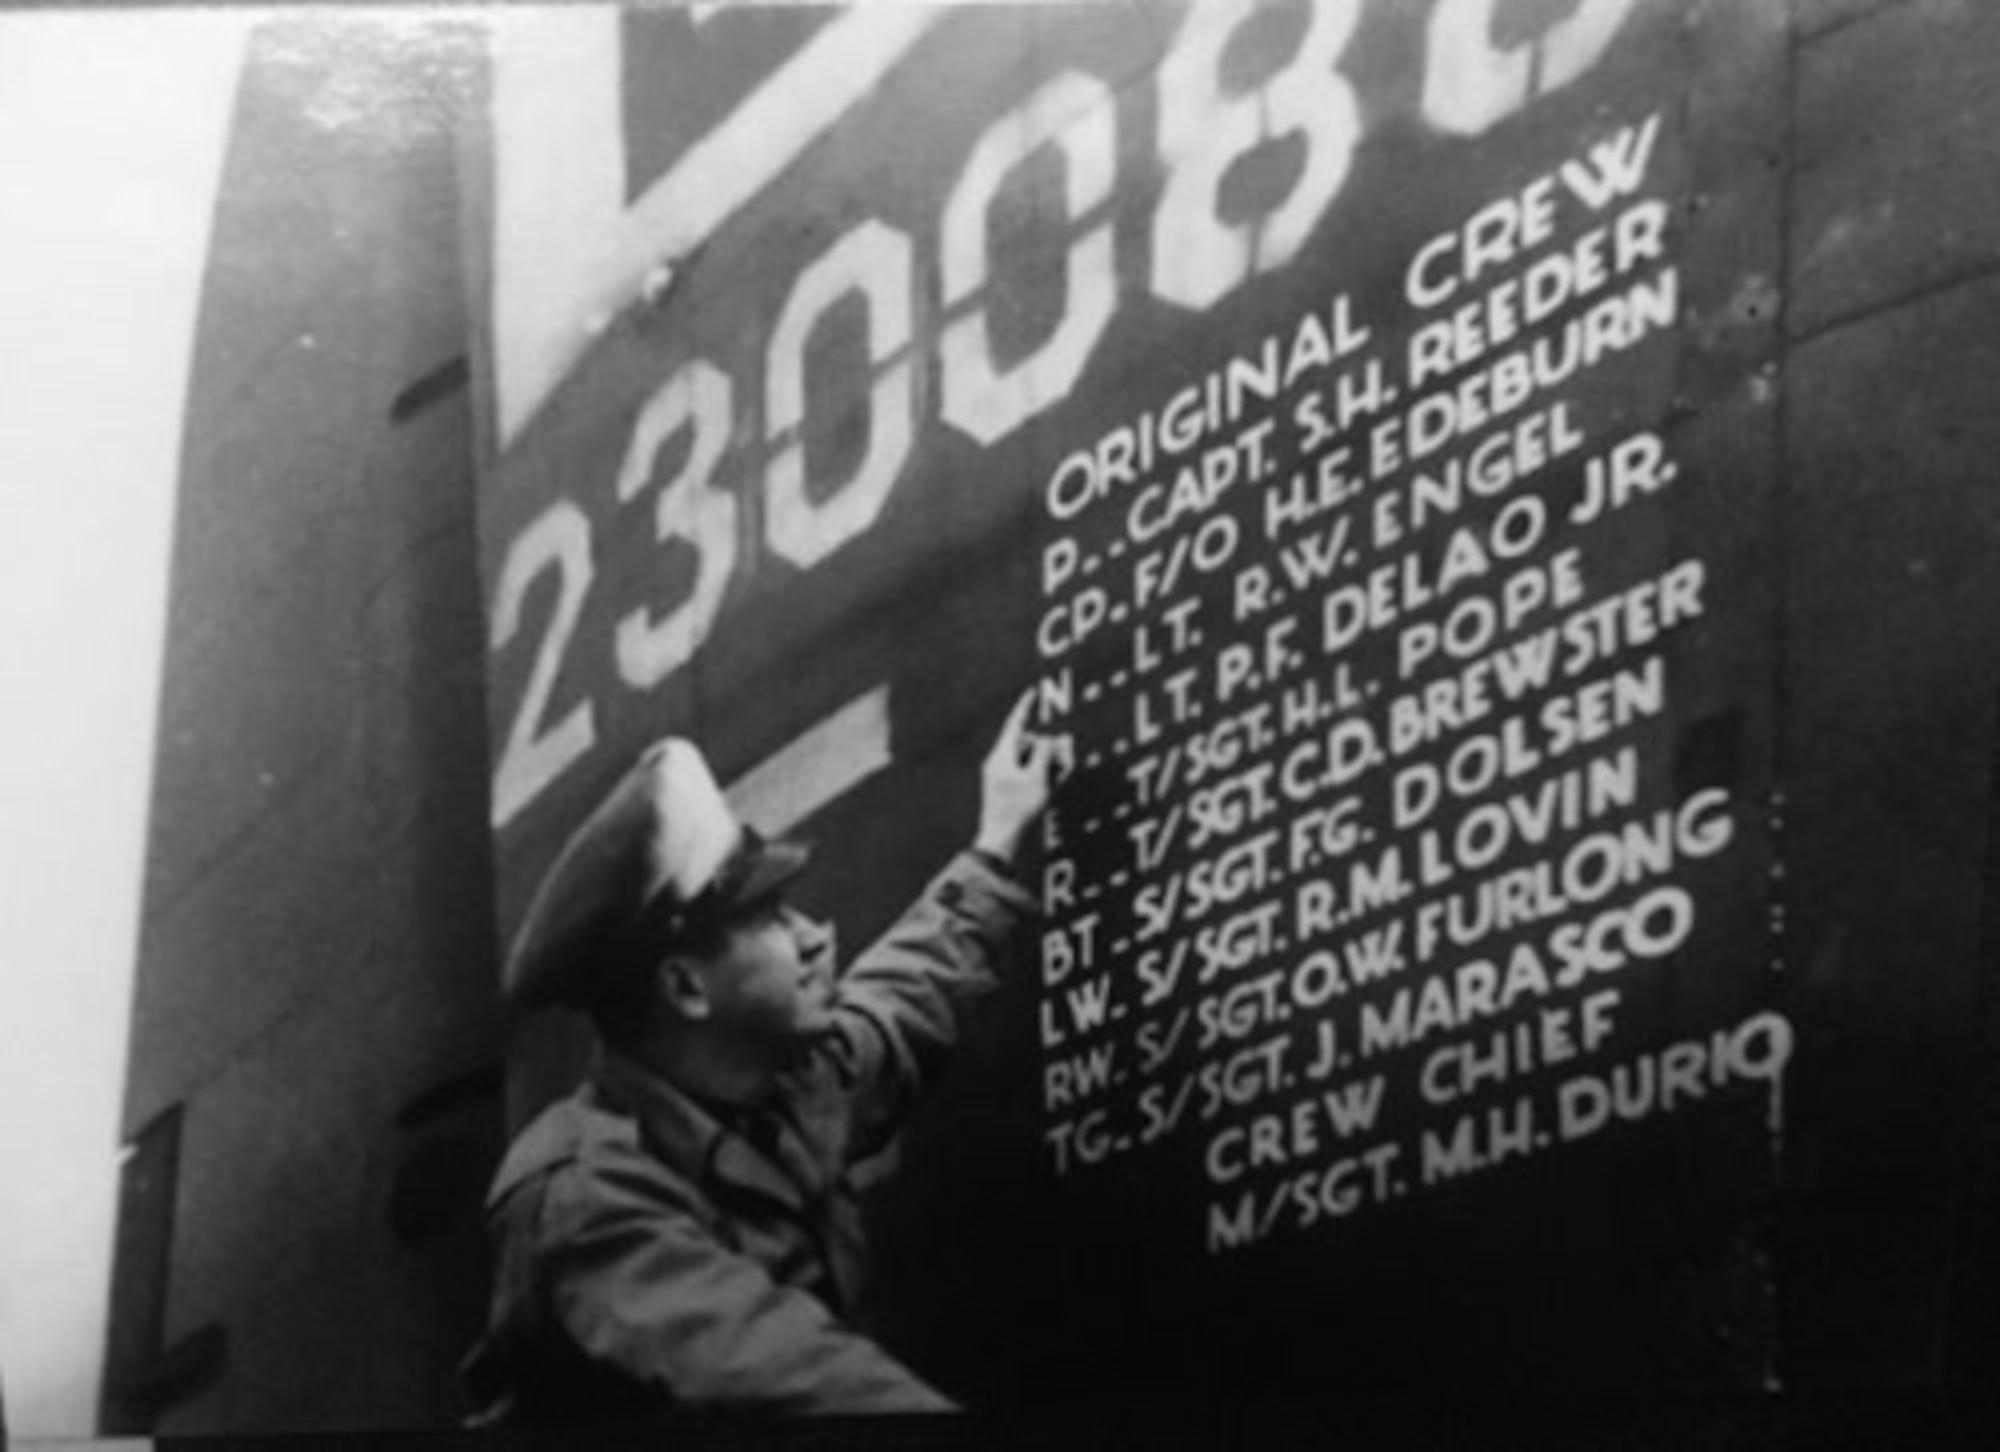 The tail of the original “Squawkin Hawk,” a B-17 Flying Fortress which flew out of Thorpe Abbotts, Norfolk, England, during World War II and was the first from the 100th Bomb Group to reach 50 combat missions, displays the names of its first assigned crew in 1943. Royal Air Force Mildenhall’s heritage nose art honors those who served at Thorpe Abbotts during World War II, many of whom made the ultimate sacrifice. (Courtesy photo from 100th Bomb Group Foundation archives)